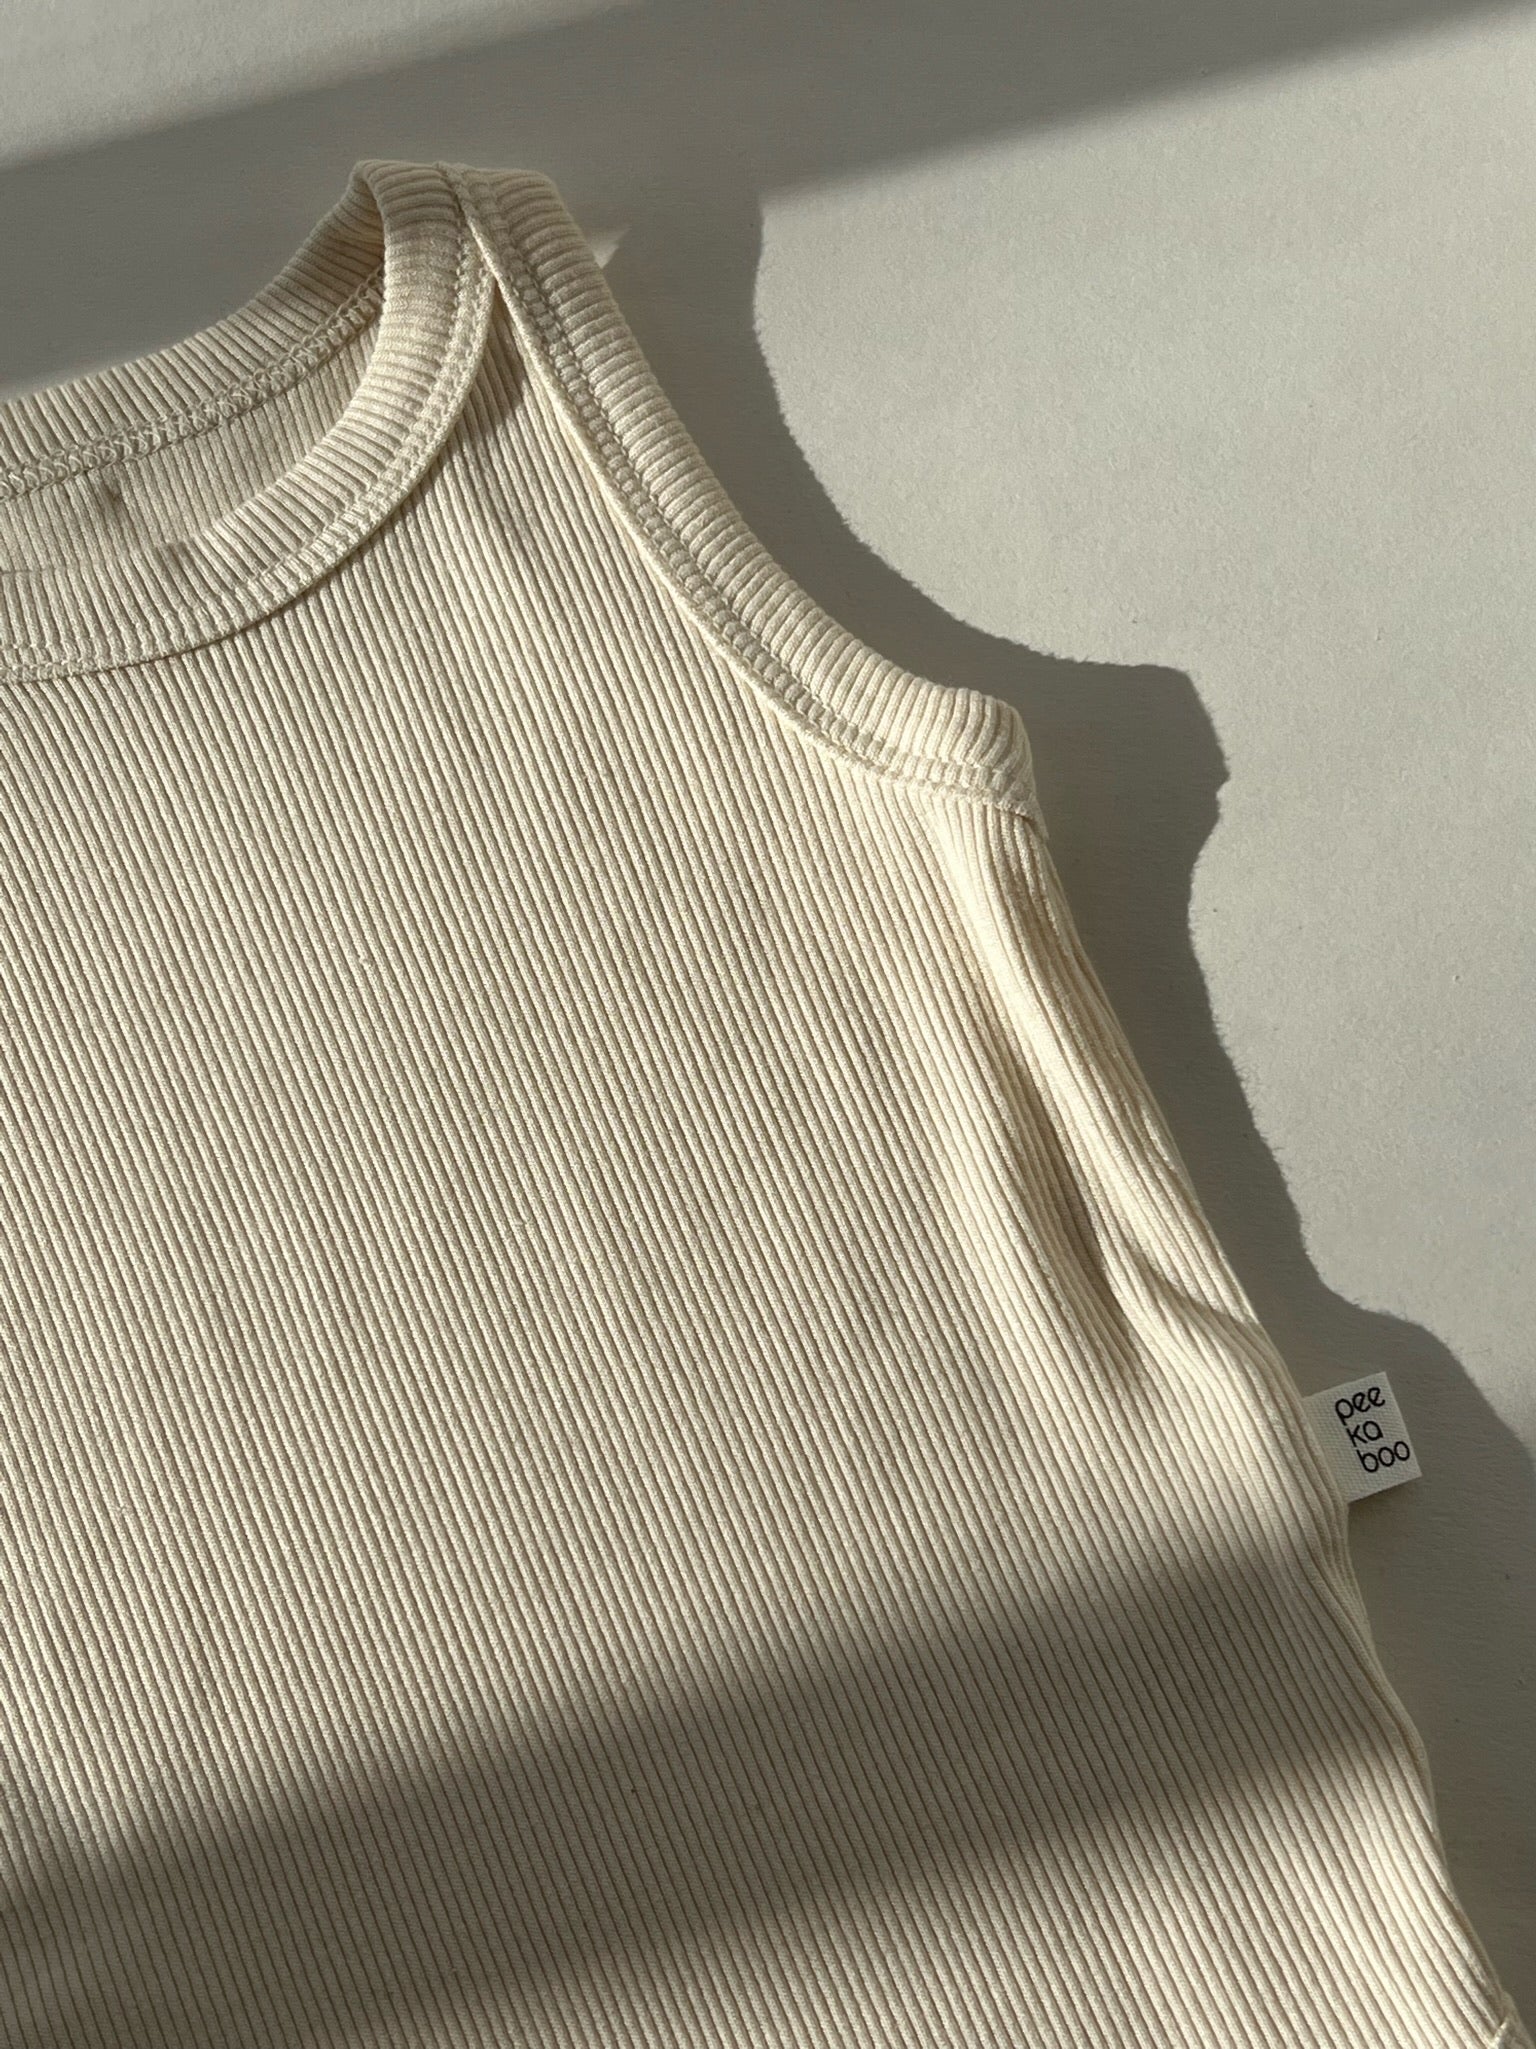 Peekaboo Baby Cotton Ribbed Bodysuit / Available in Cream and Khaki